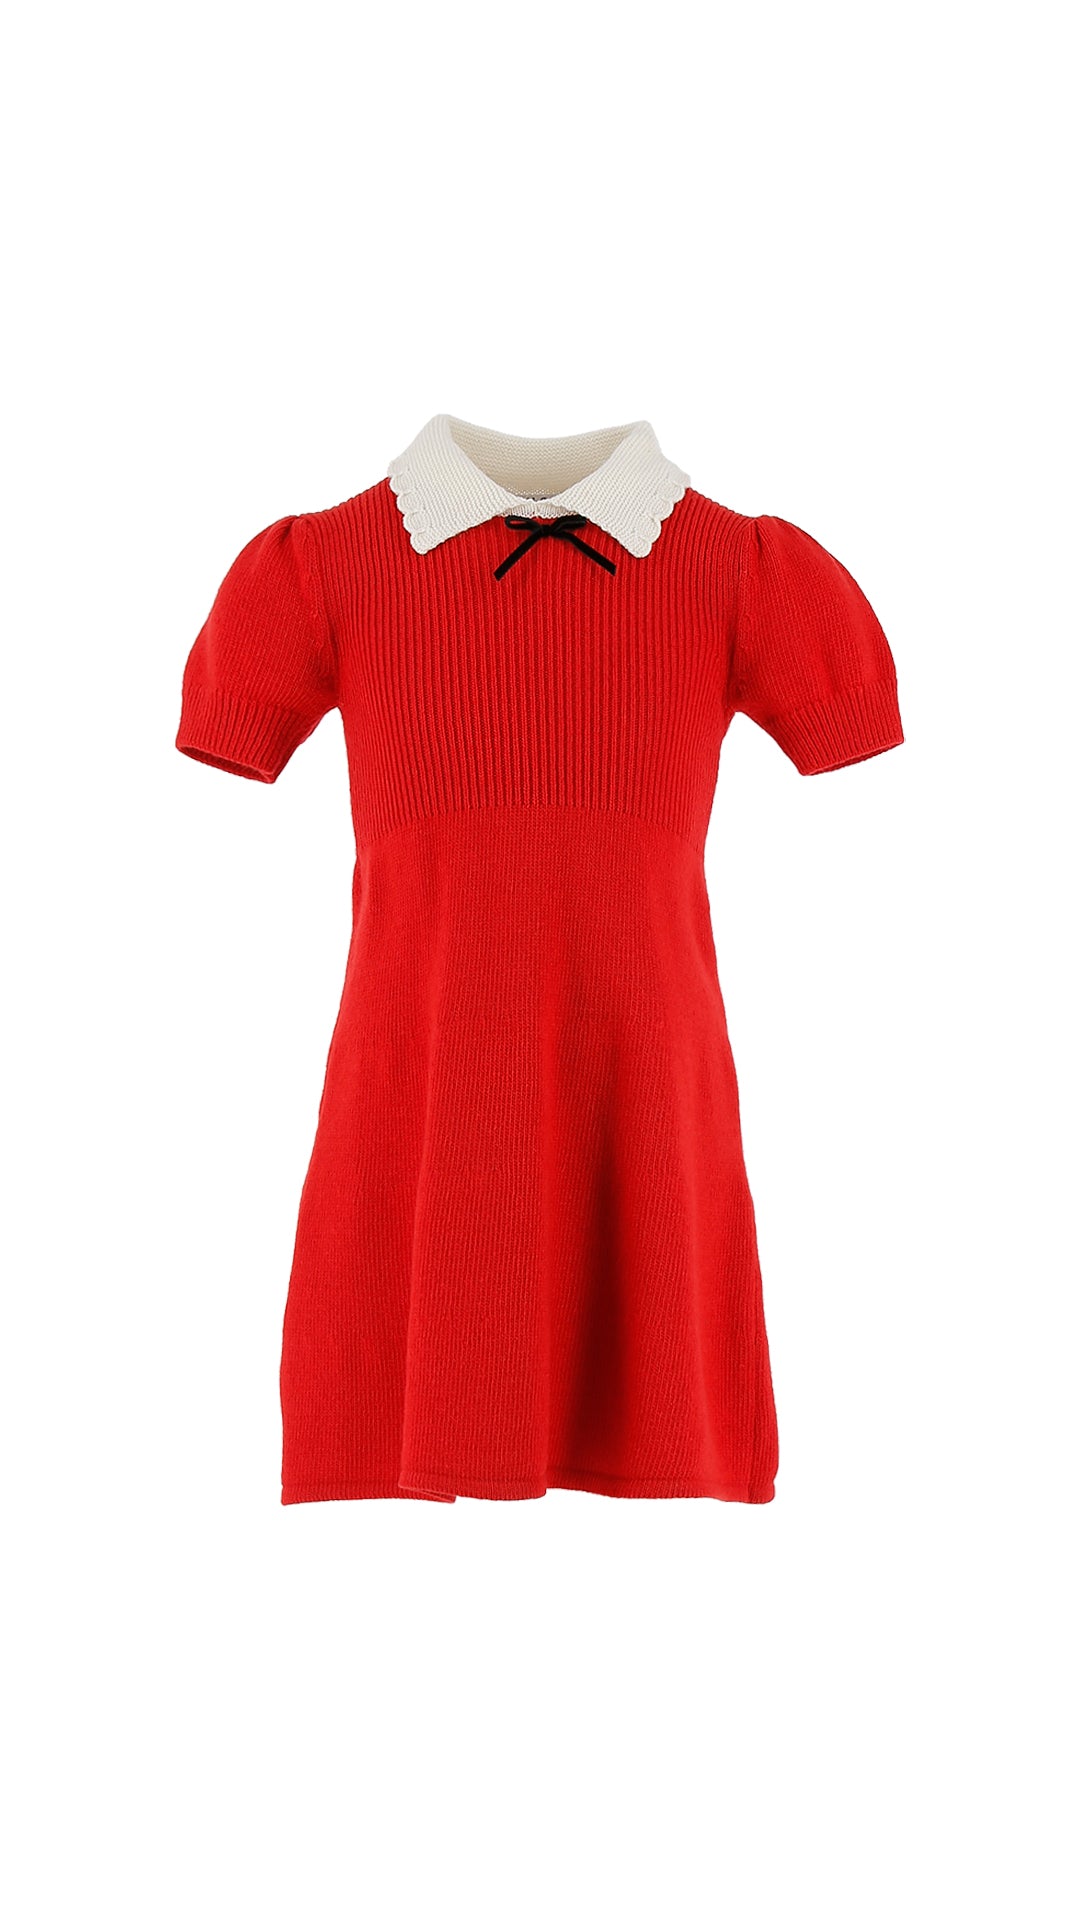 PHILOSOPHY SHORT SLEEVE KNIT DRESS W/COLLAR AND BOW DETAIL